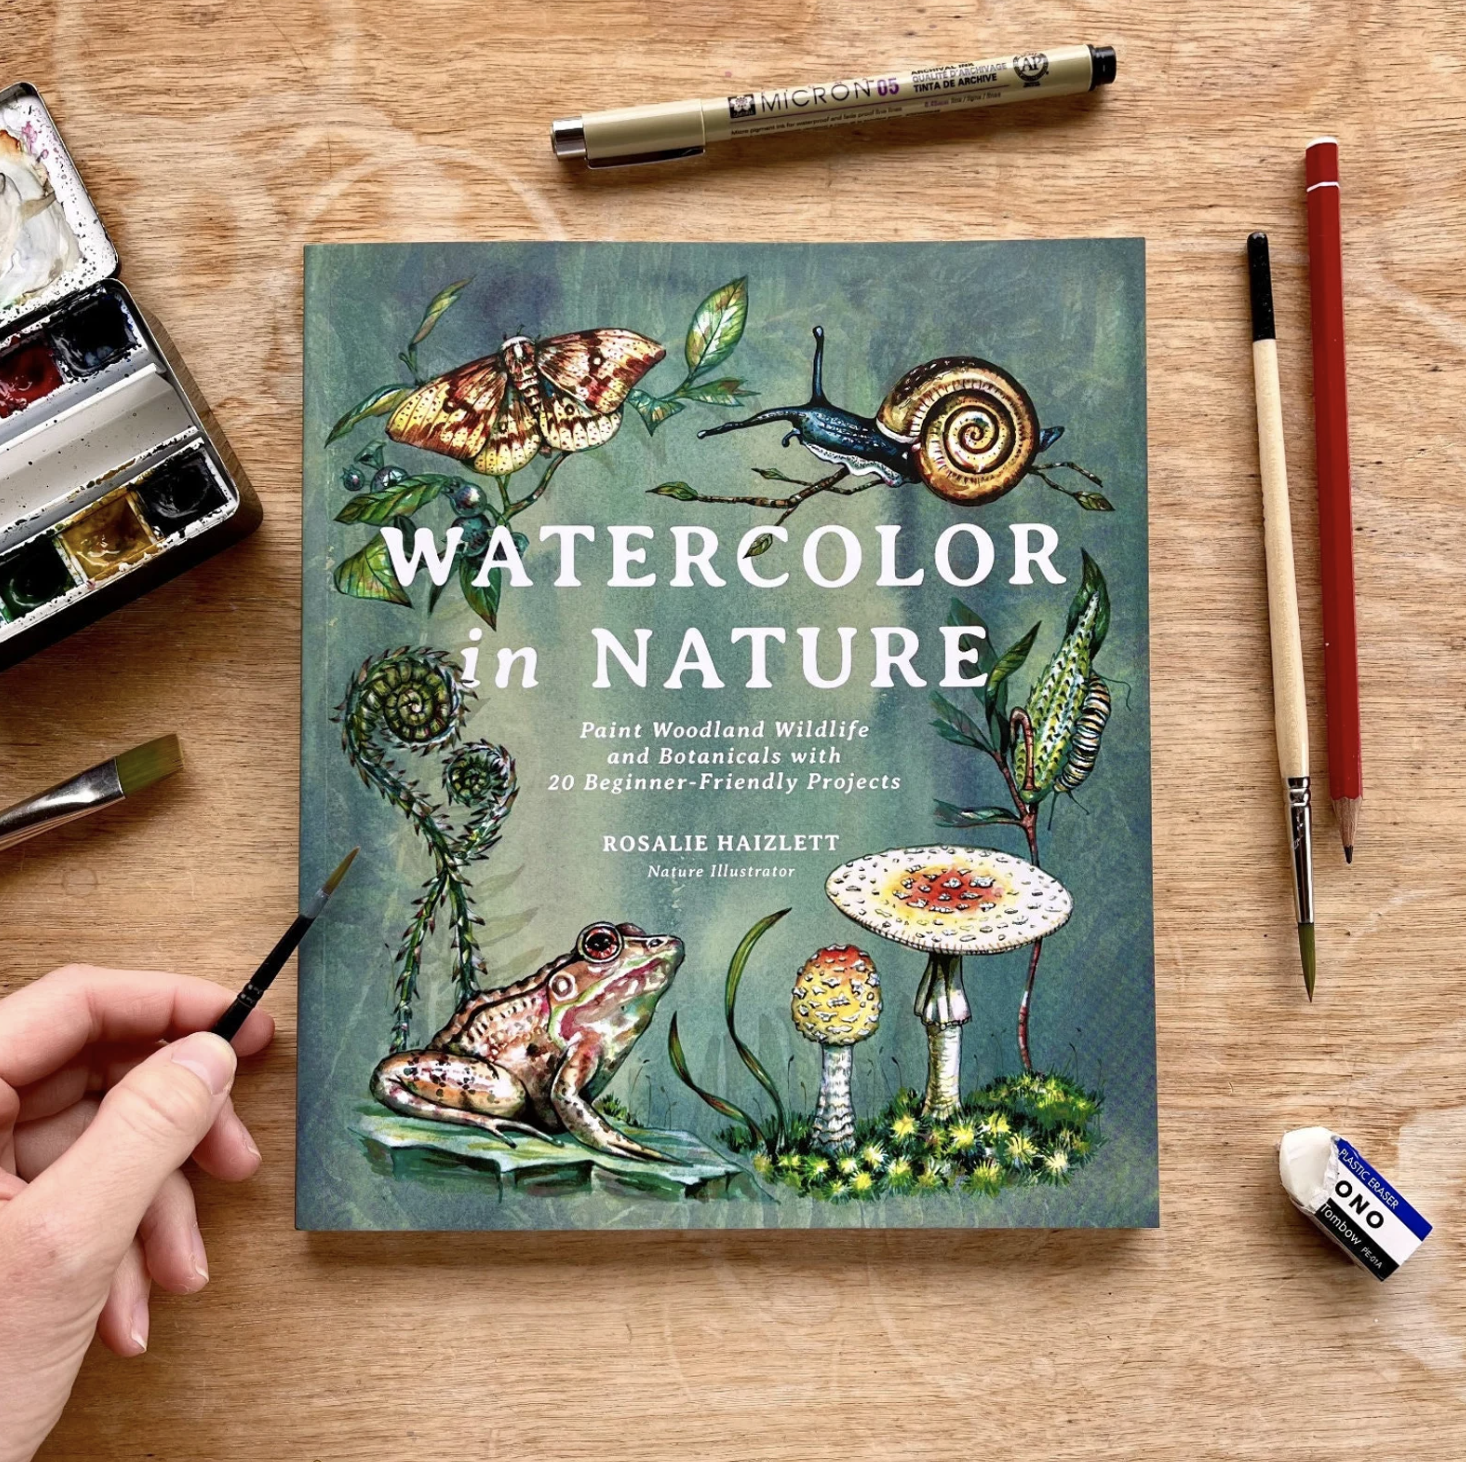 Watercolor in Nature - Autographed Book by Rosalie Haizlett